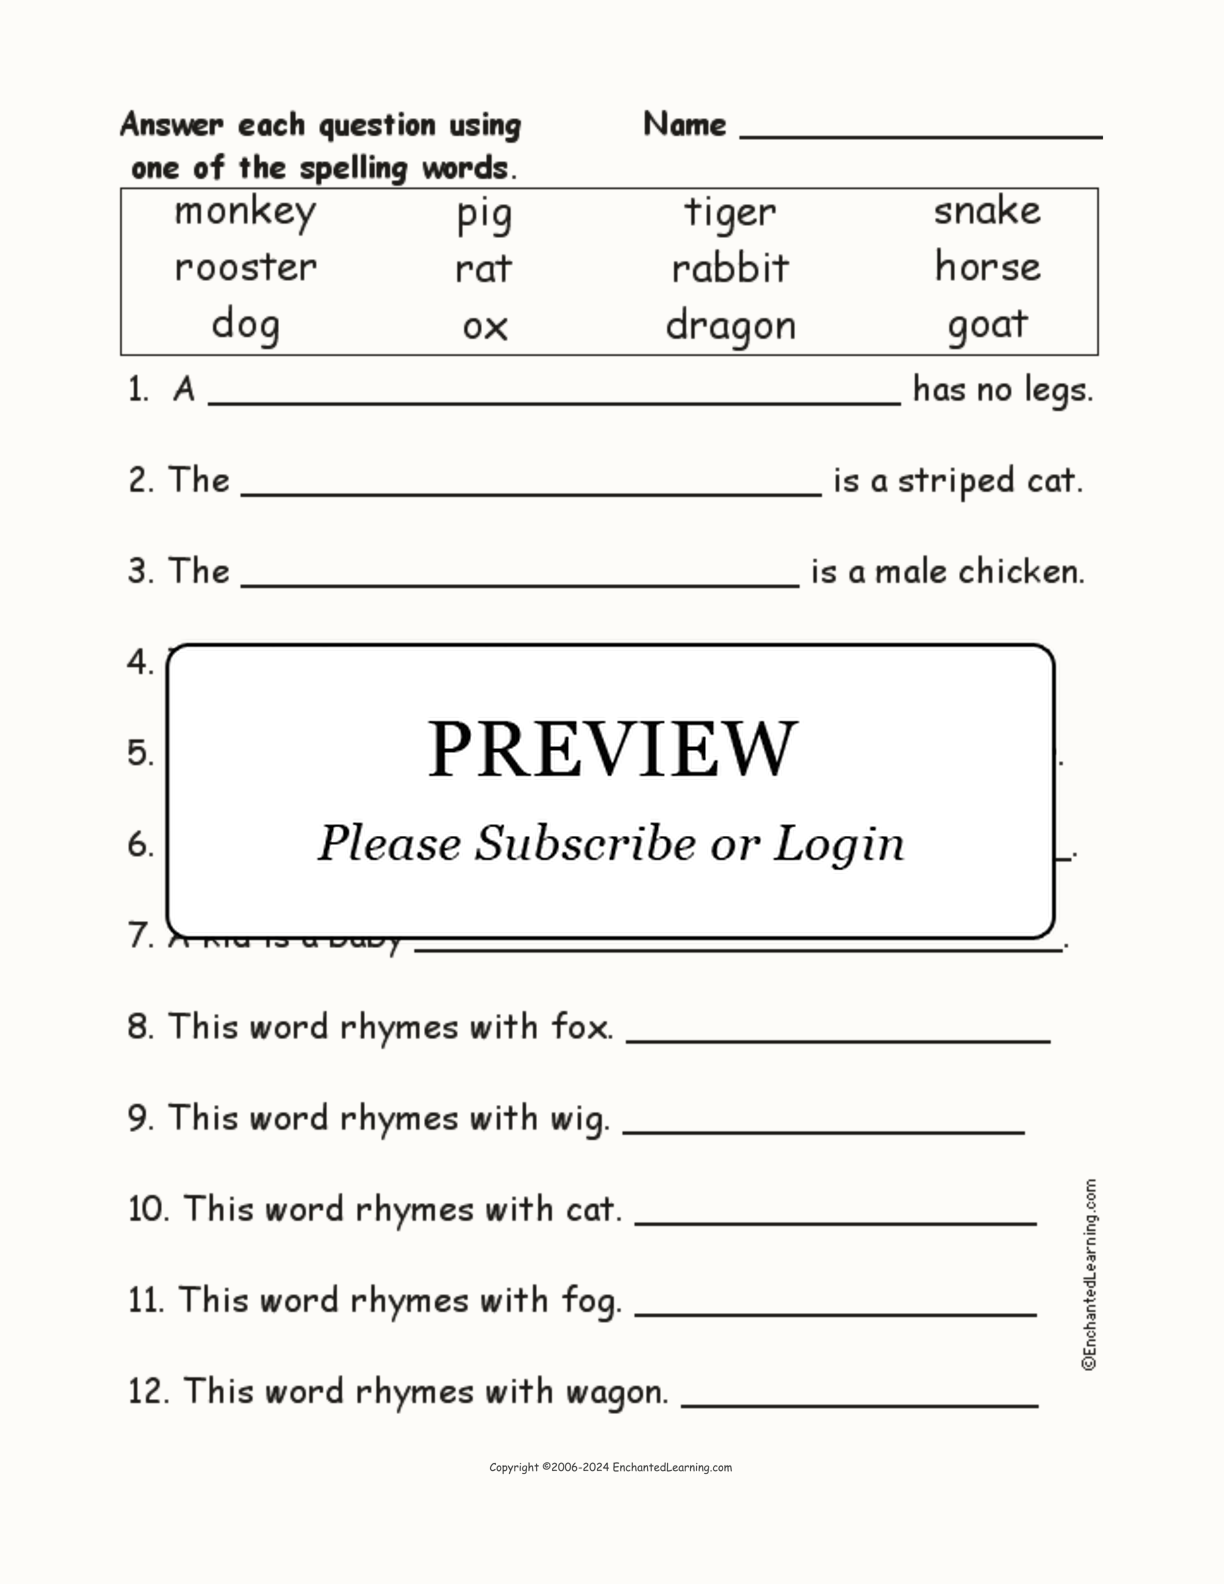 Chinese Zodiac Animals: Spelling Word Questions interactive worksheet page 1